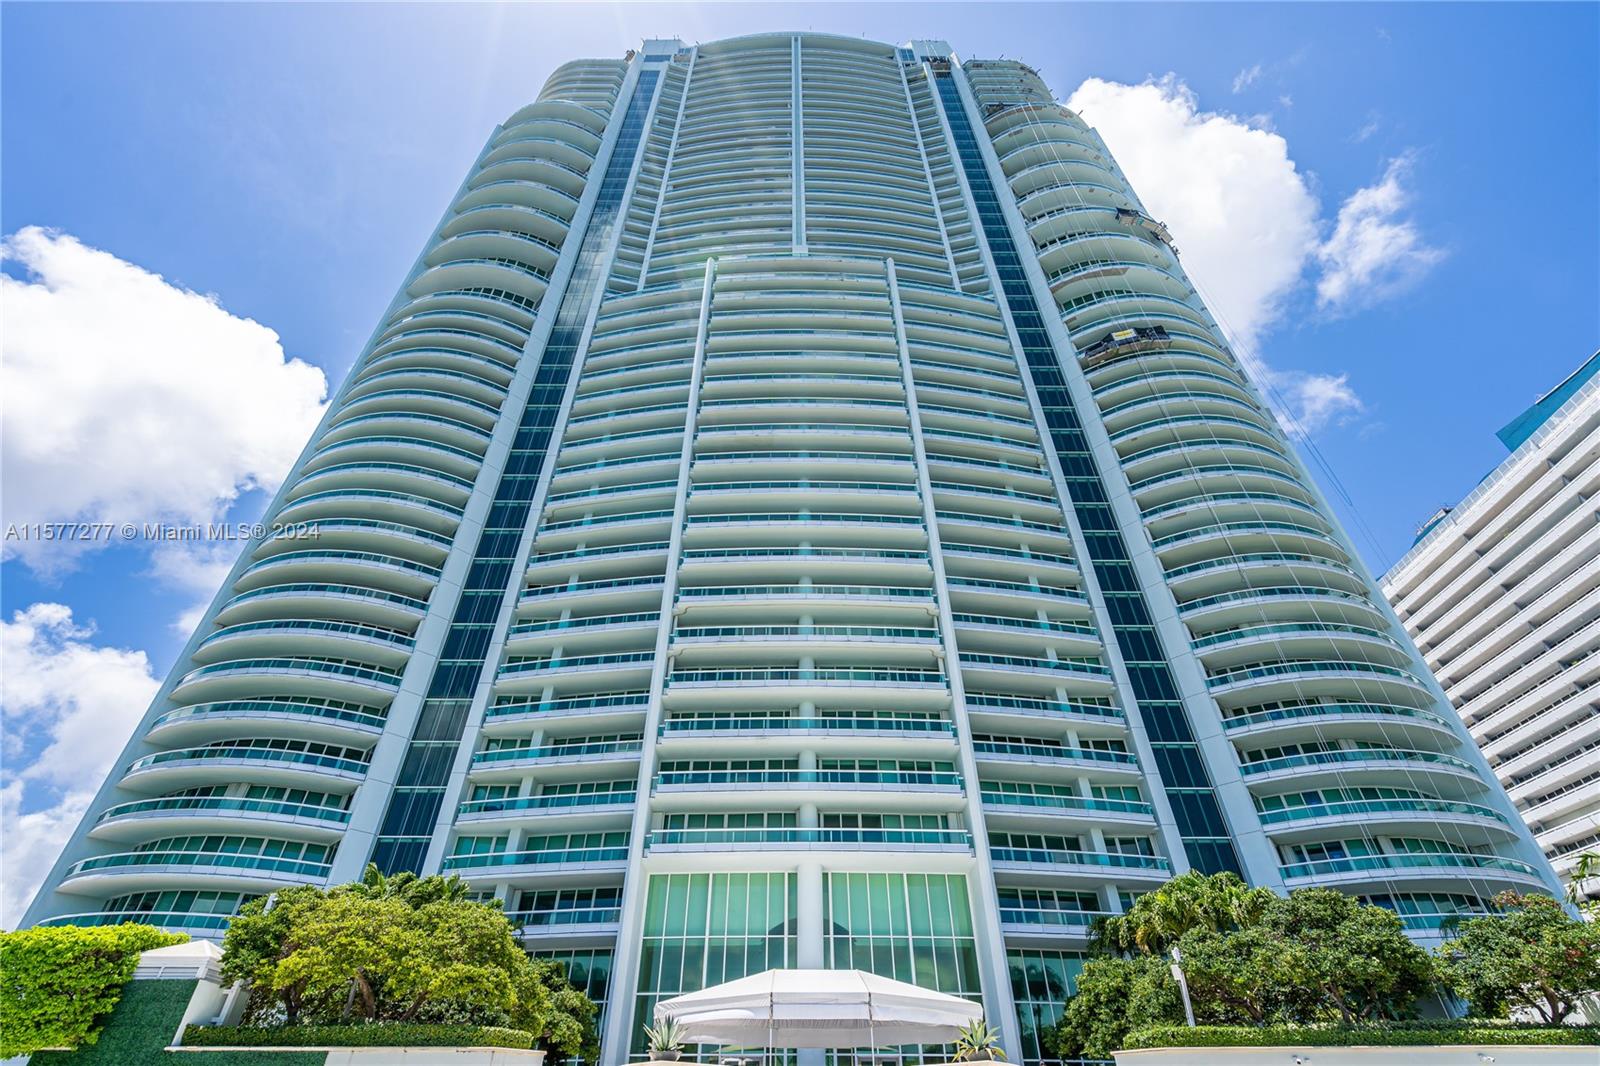 1643  Brickell Ave #1506 For Sale A11577277, FL